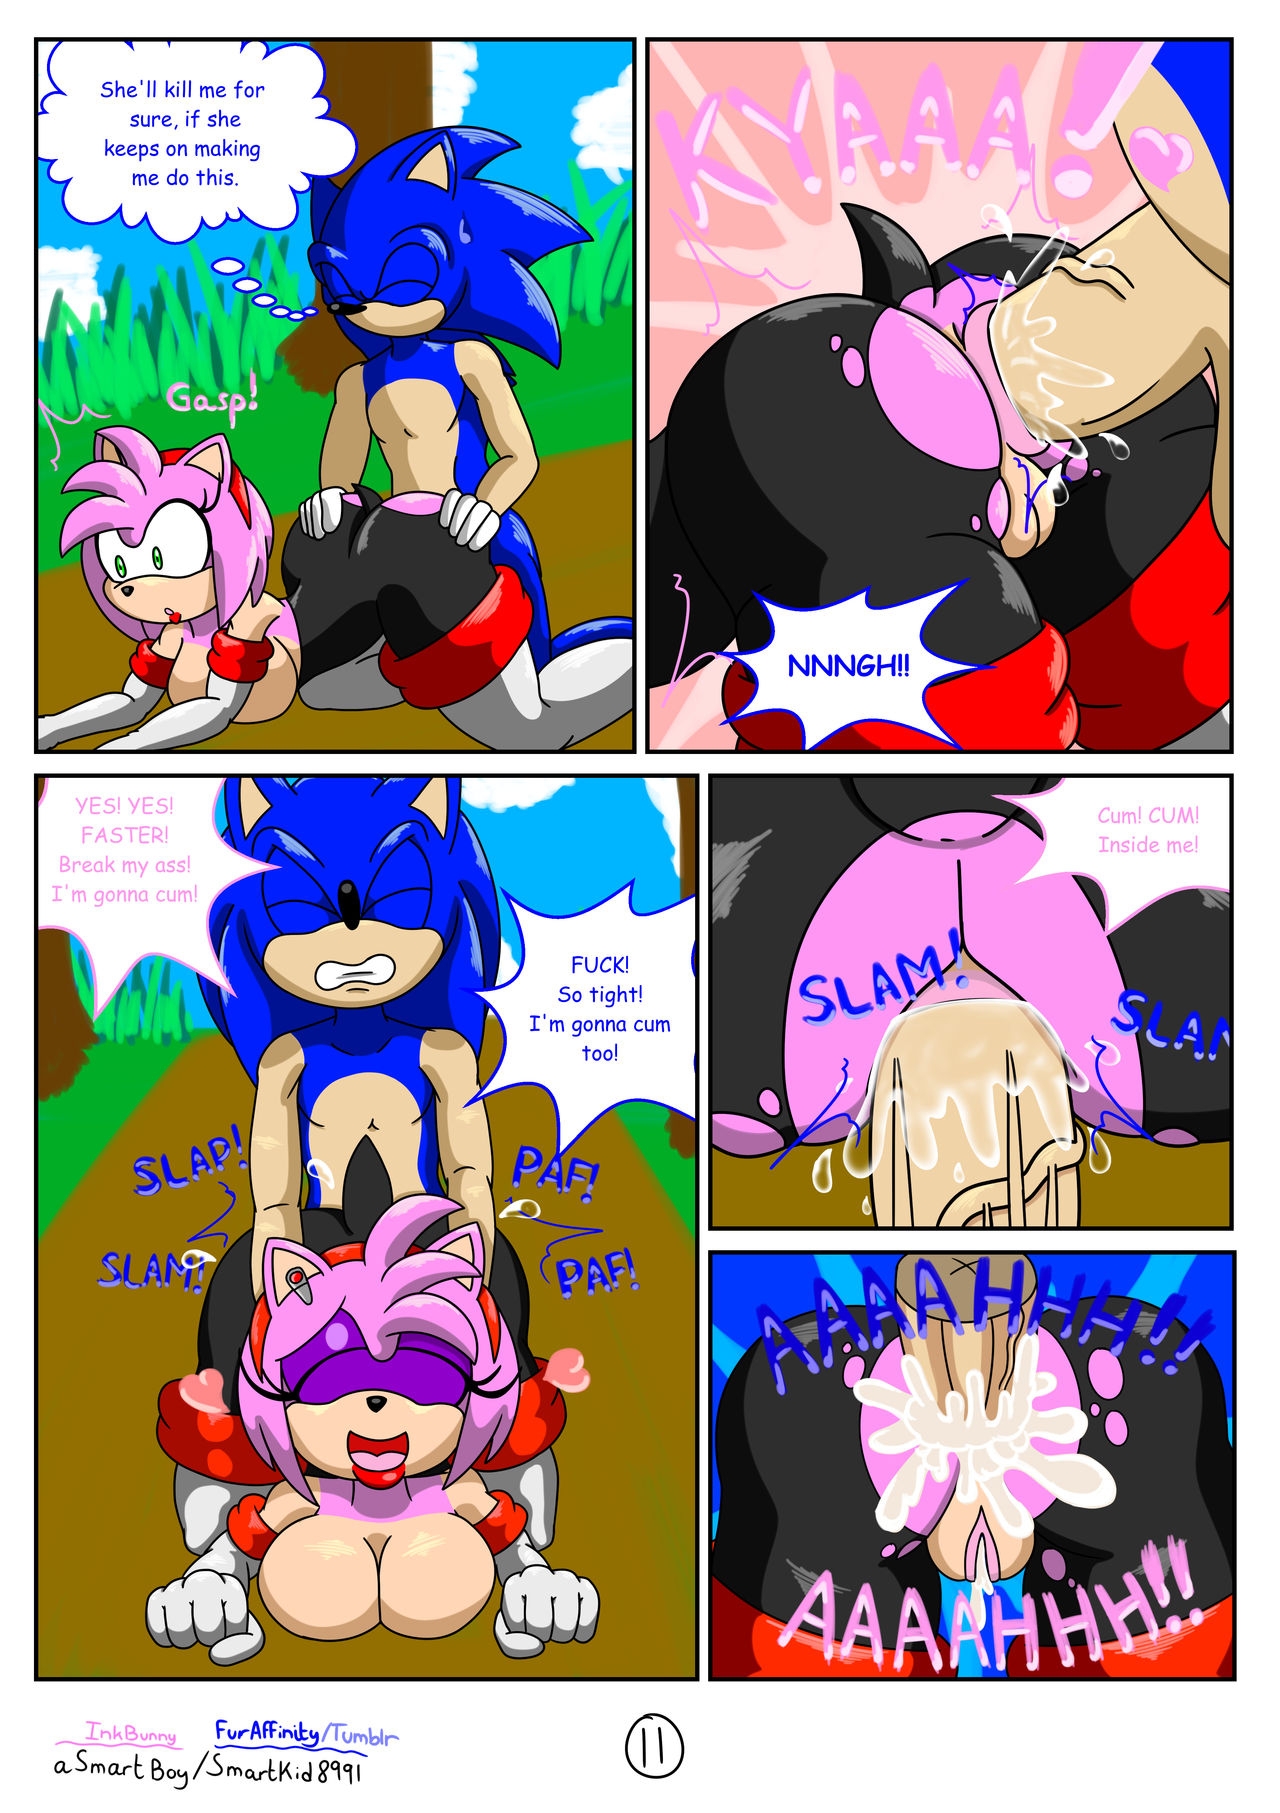 [SmartKid8991] Agent Whore Bootcamp (Sonic The Hedgehog) [Ongoing] 11